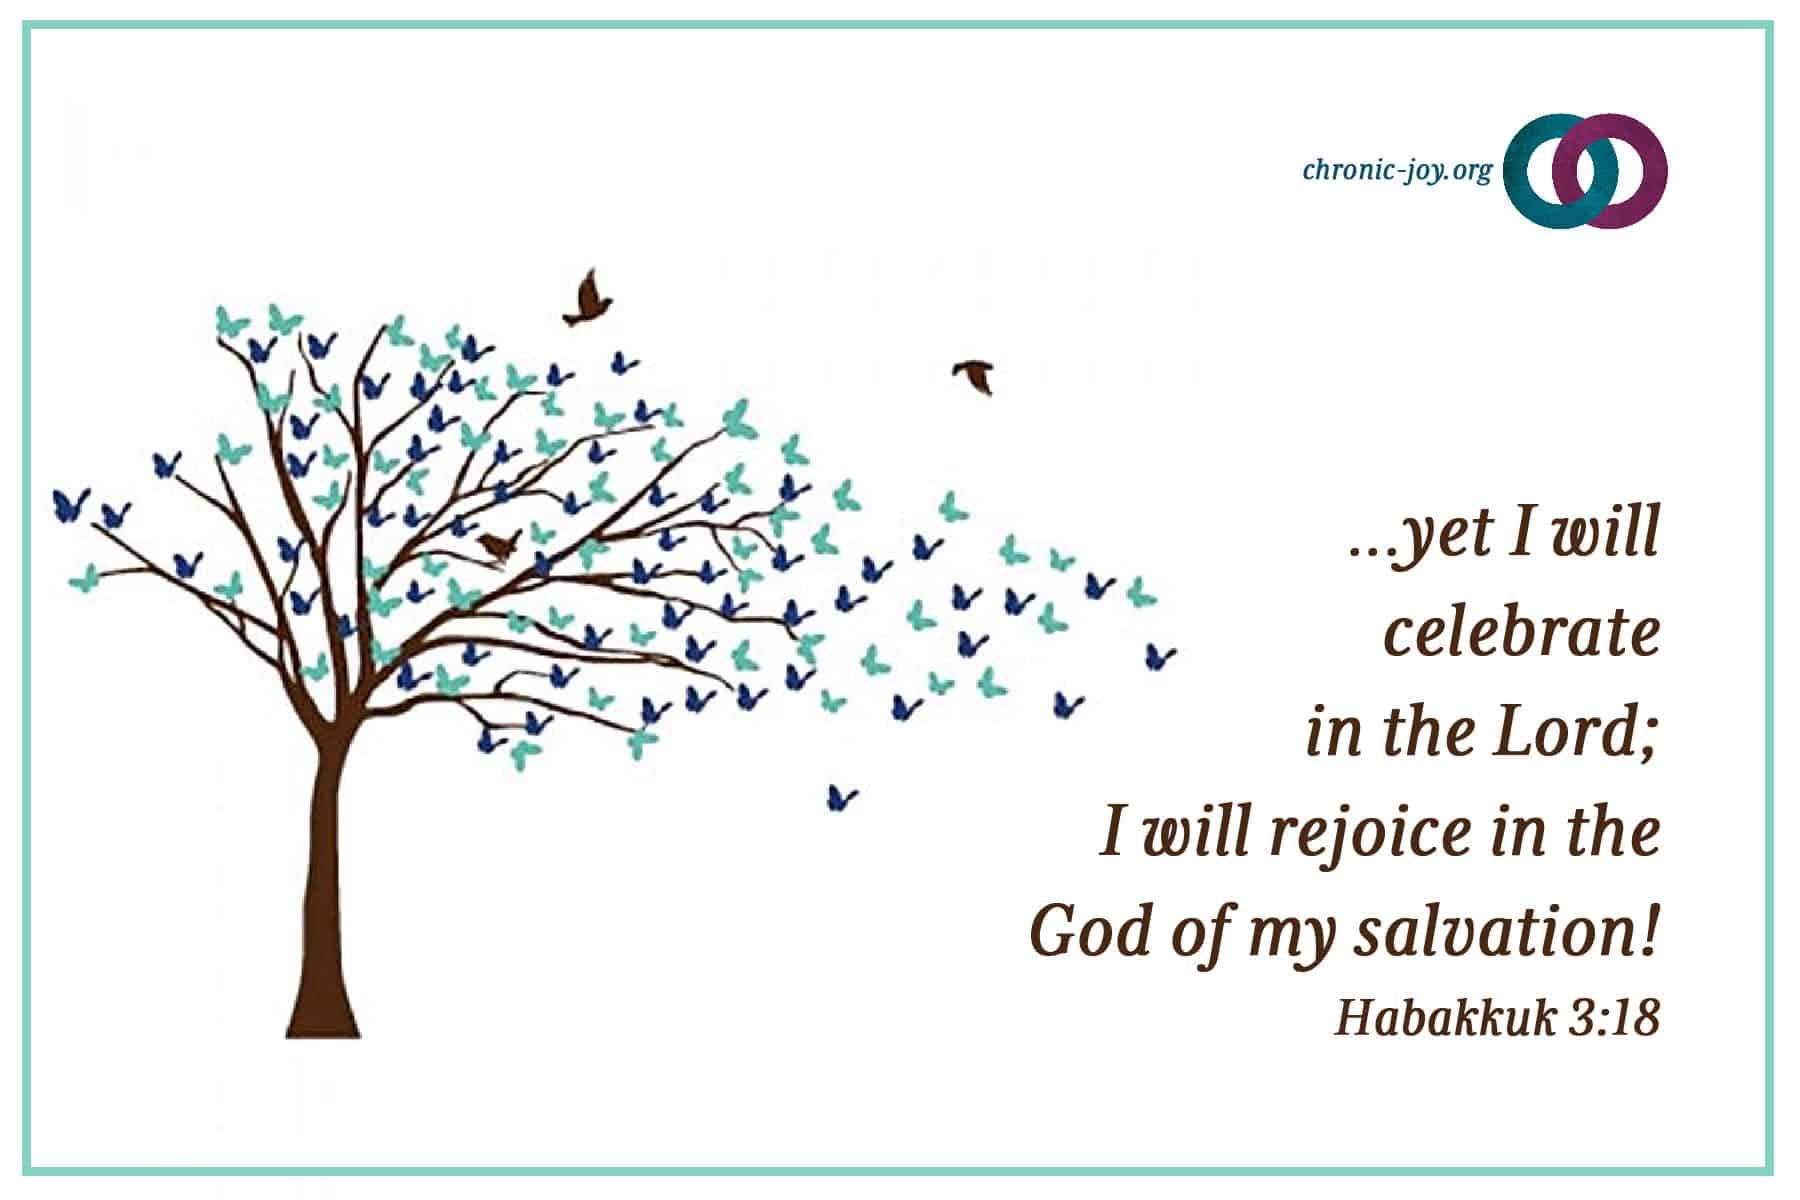 ...yet I will celebrate in the Lord in